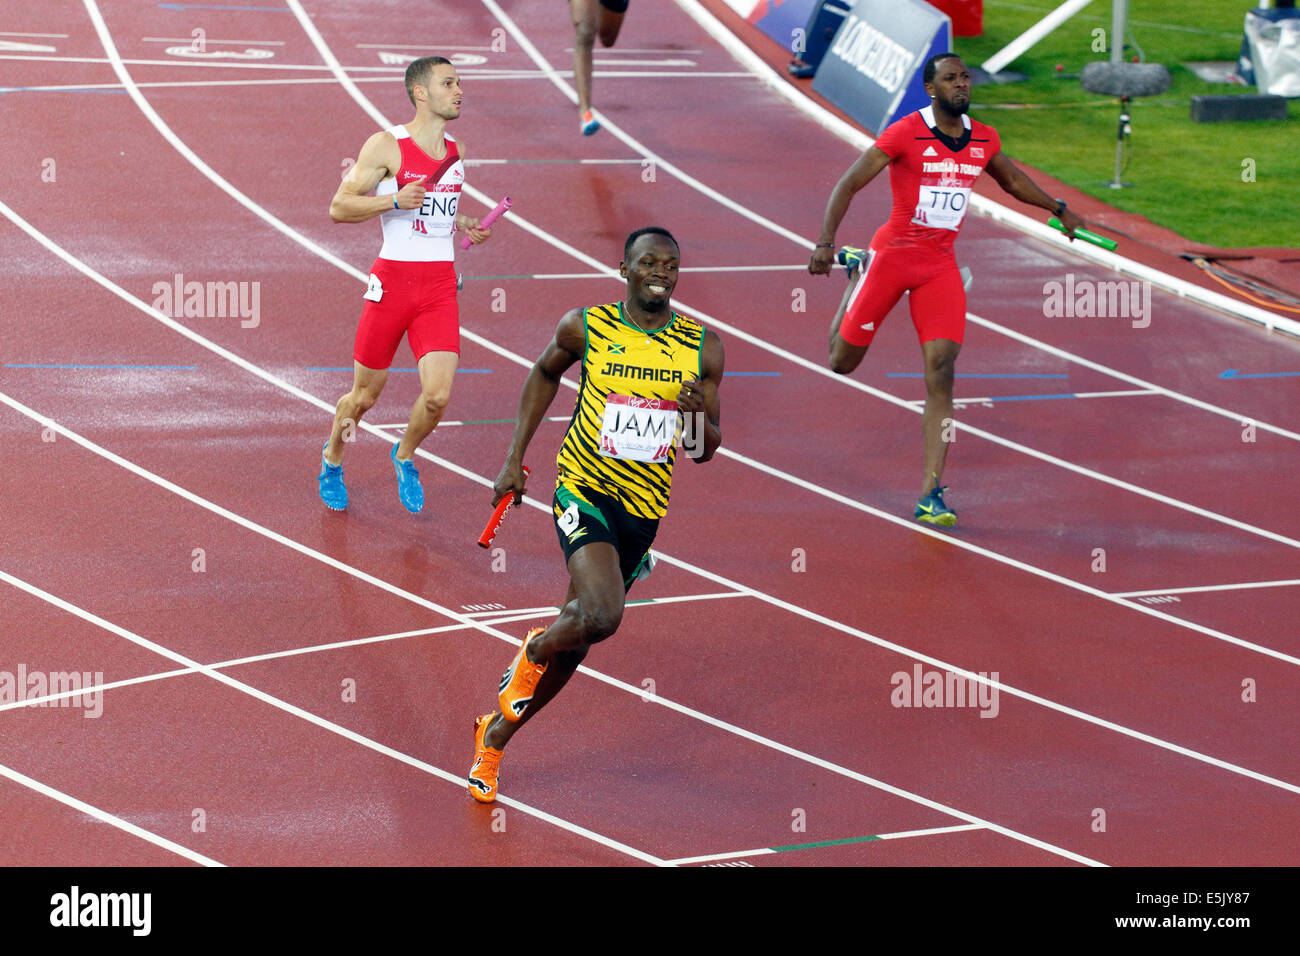 Hampden Park, Glasgow, Scotland, UK, Saturday, 2nd August, 2014. Glasgow 2014 Commonwealth Games, Men's 4 x 100m Relay Final. After the finish line. Left to Right. England Silver Danny Talbot, Jamaica Gold Usain Bolt, Trinidad and Tobago Bronze Richard Thompson Stock Photo